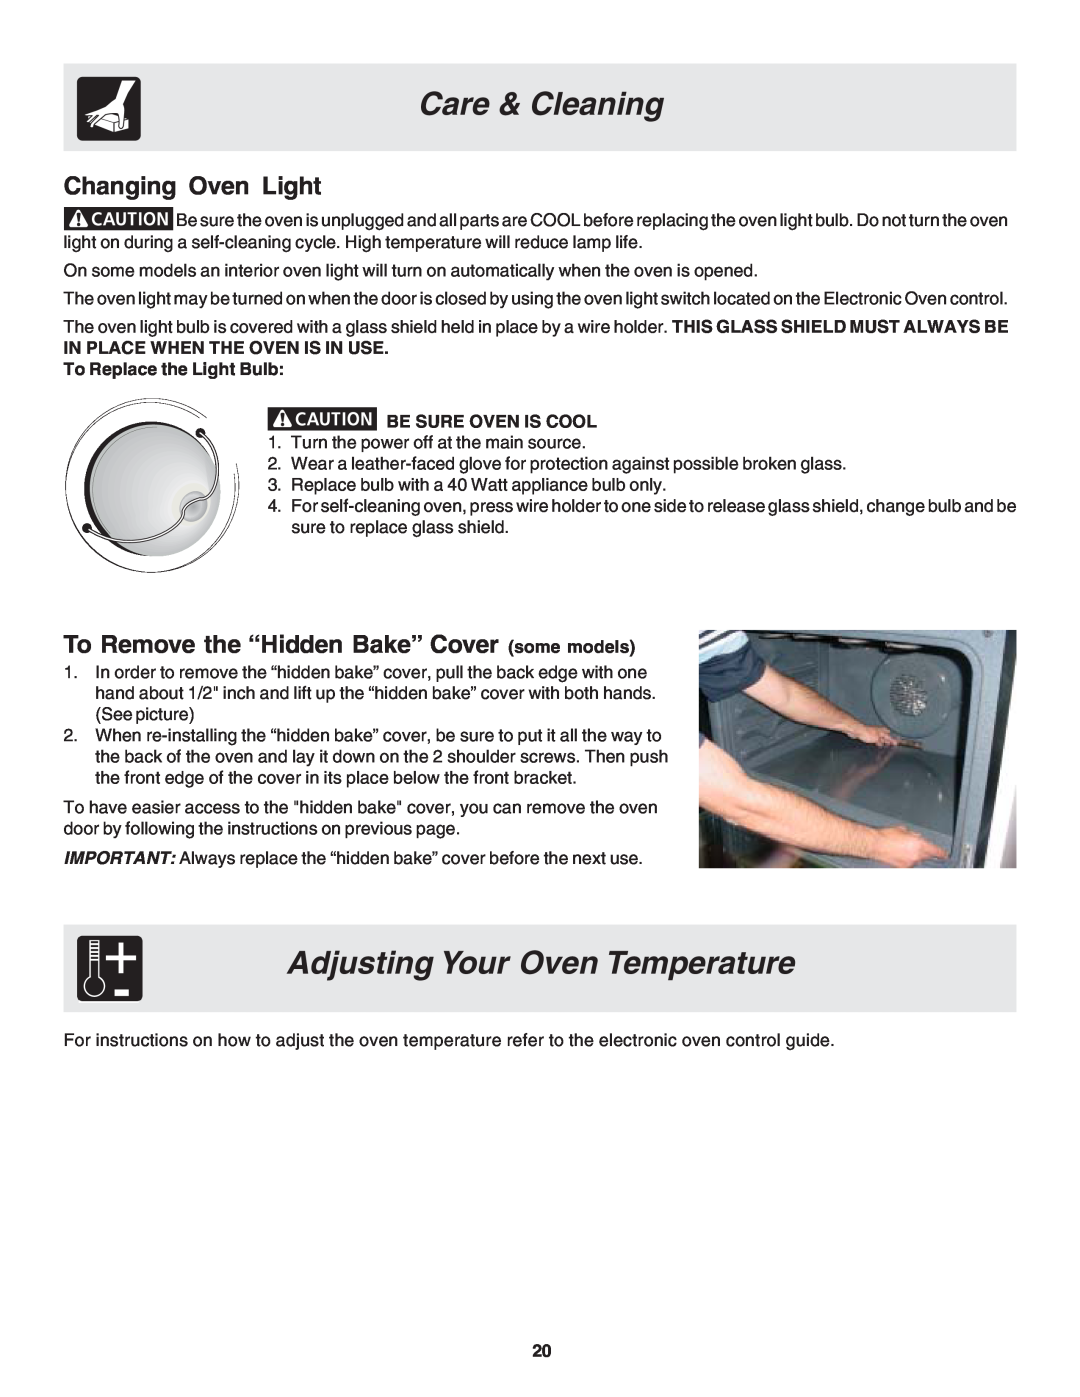 Frigidaire 318203870 Adjusting Your Oven Temperature, Changing Oven Light, To Remove the “Hidden Bake” Cover some models 